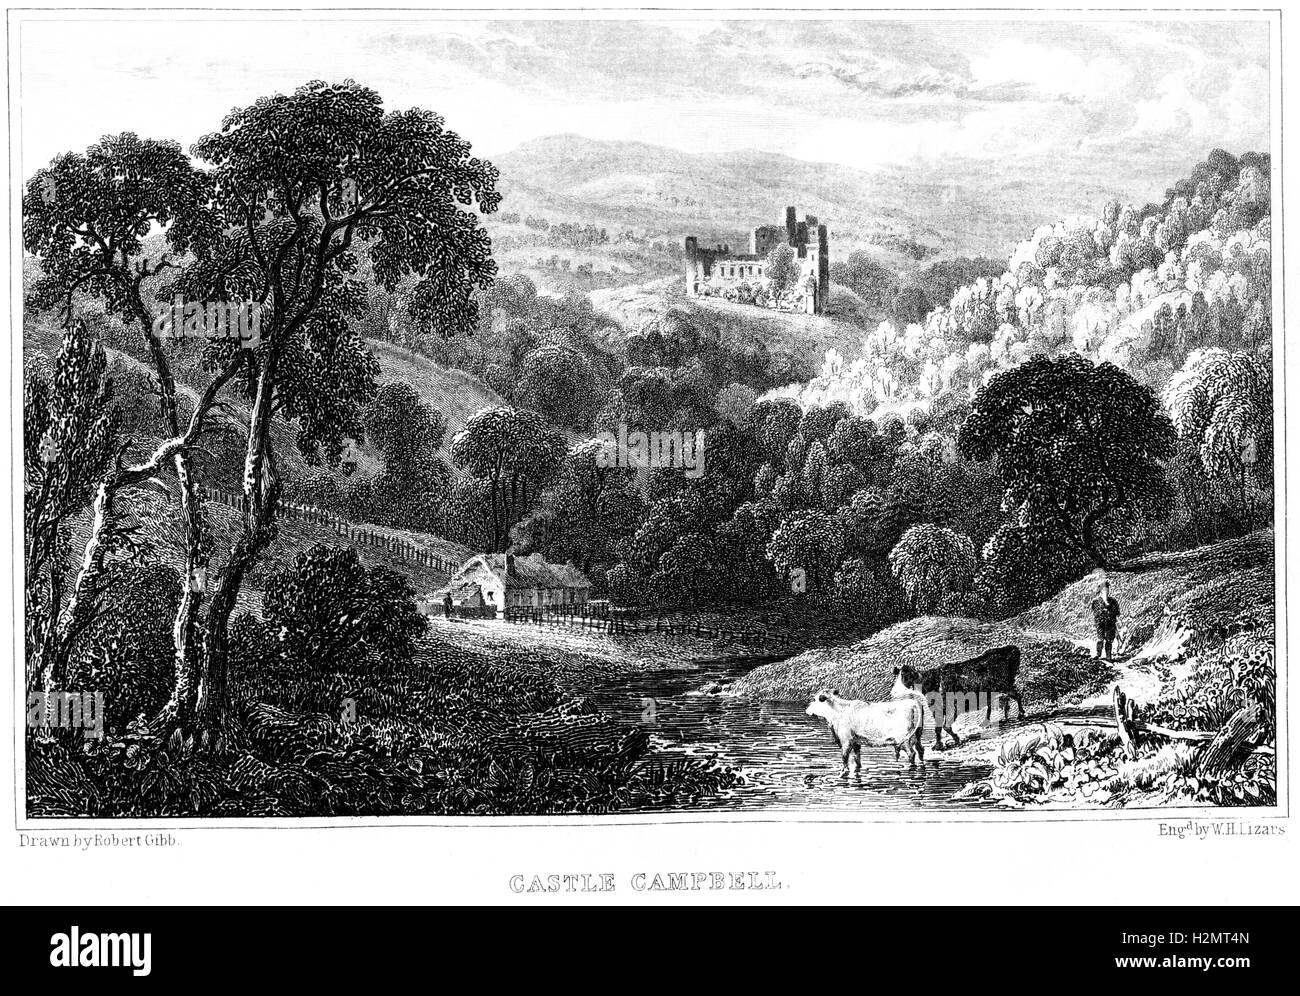 An engraving of Castle Campbell scanned at high resolution from a book ...